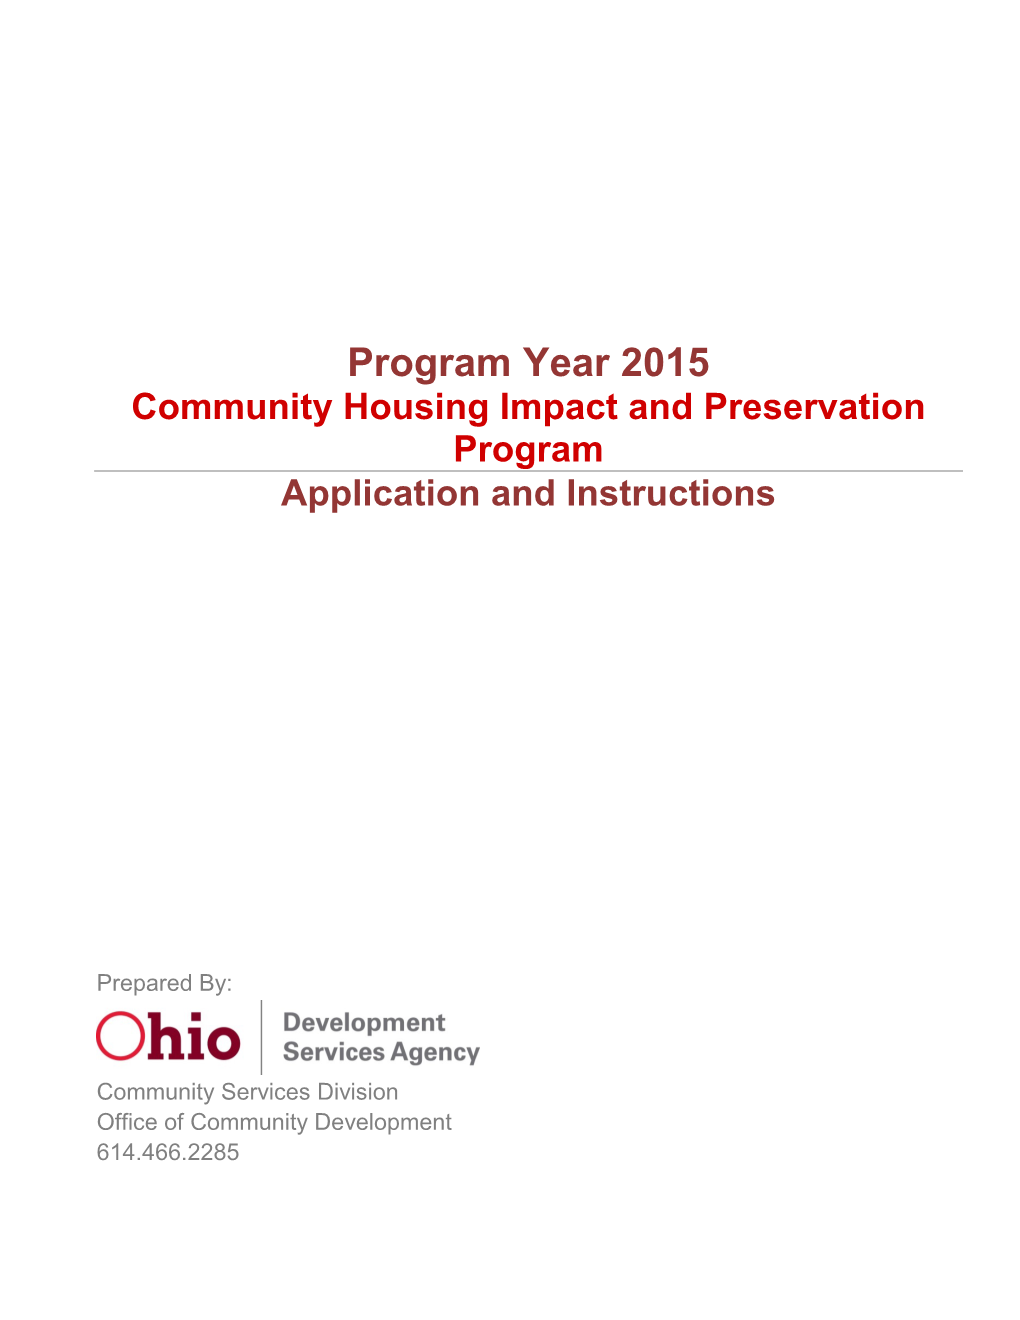 Program Year 2015 Community Housing Impact and Preservation Program Application and Instructions